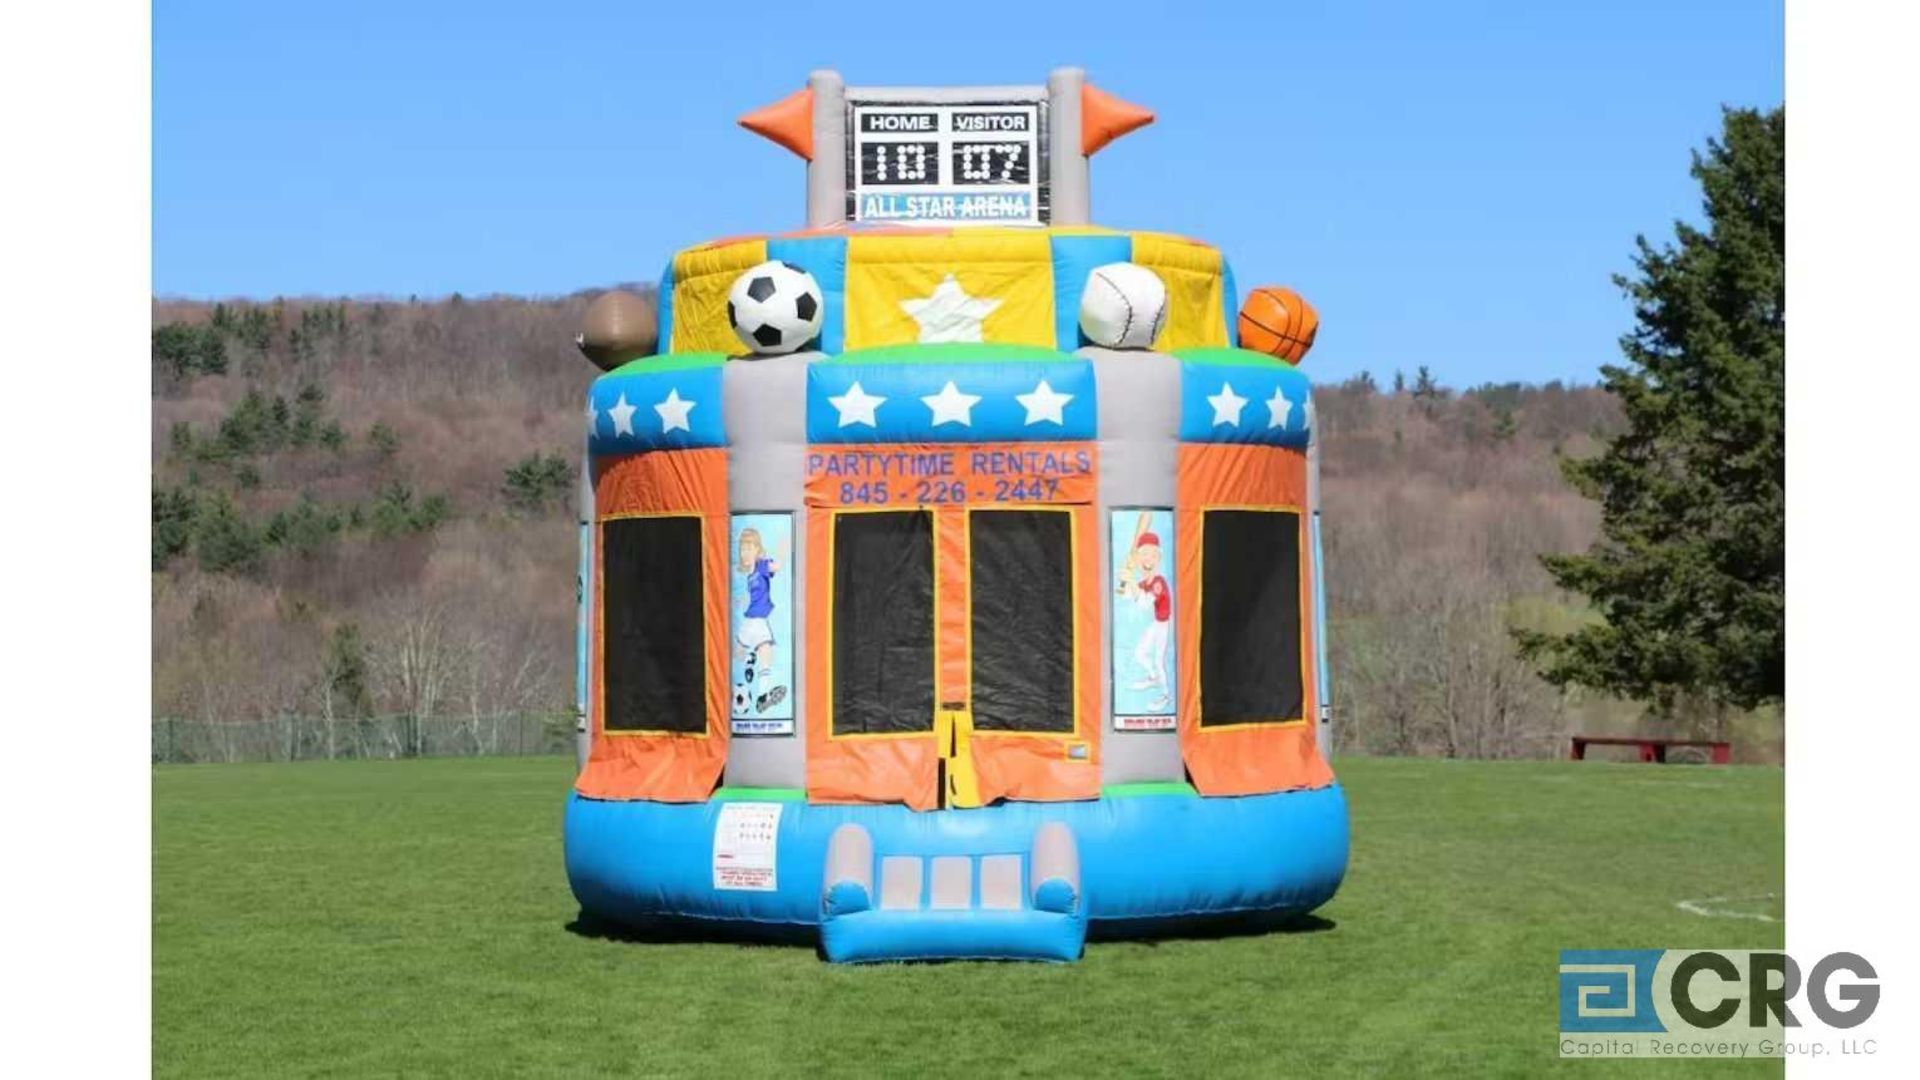 All Star Arena Bouncer Inflatable - Image 2 of 2